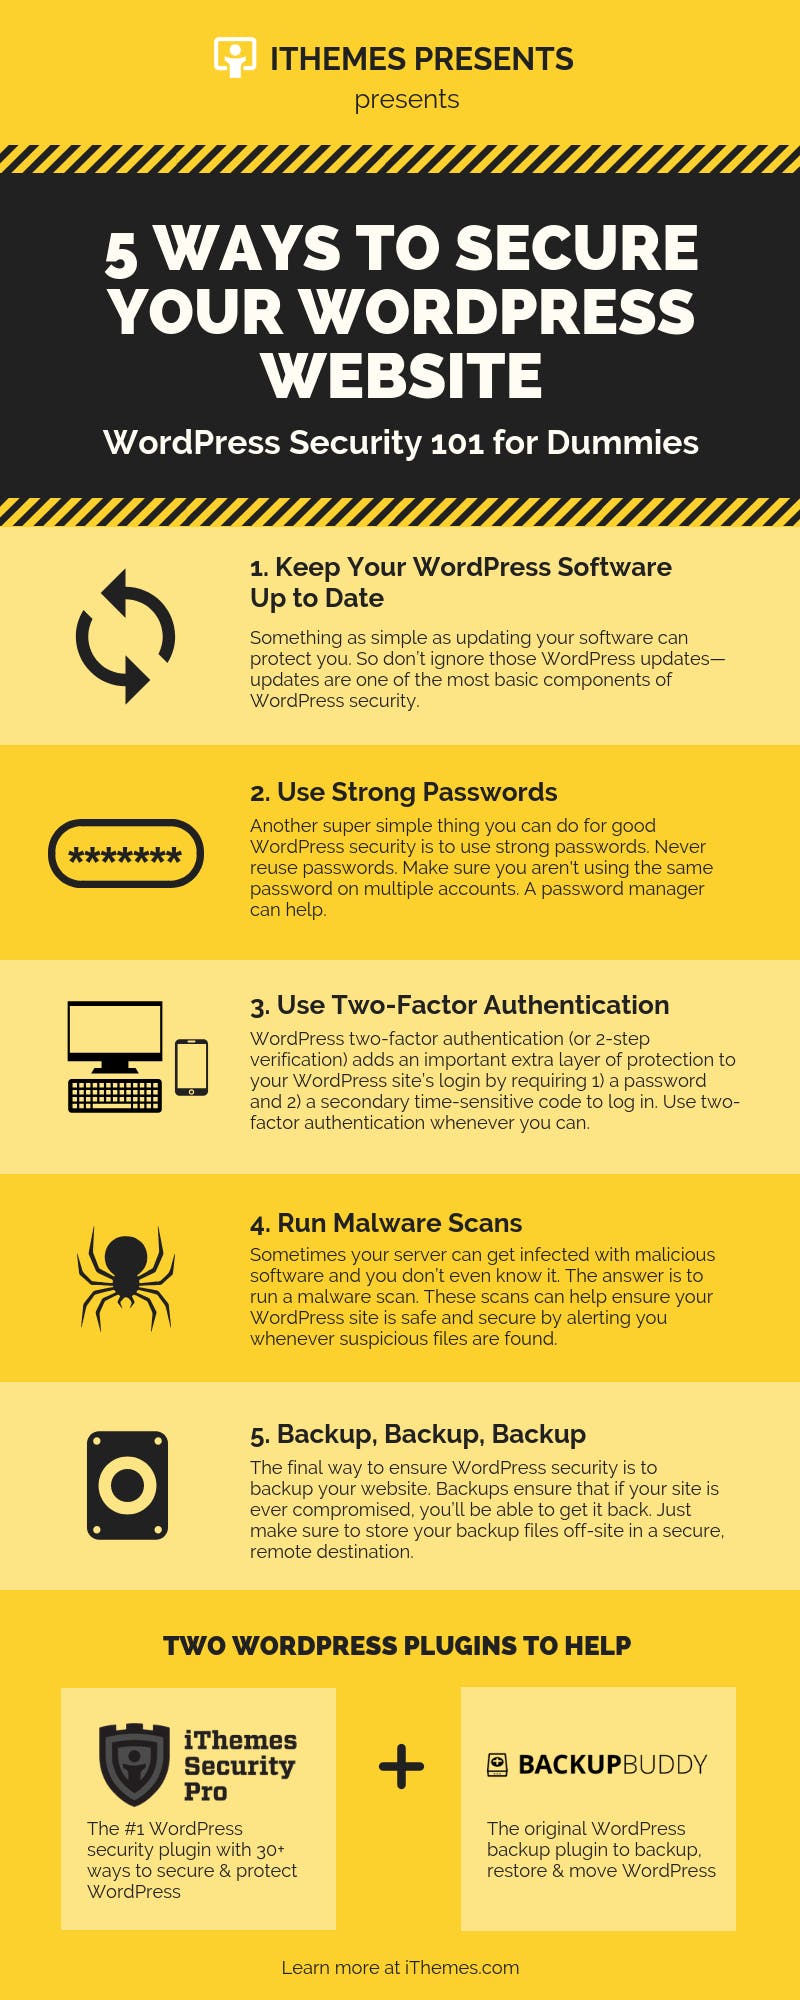 5-Ways-to-Secure-Your-WordPress-Website.png